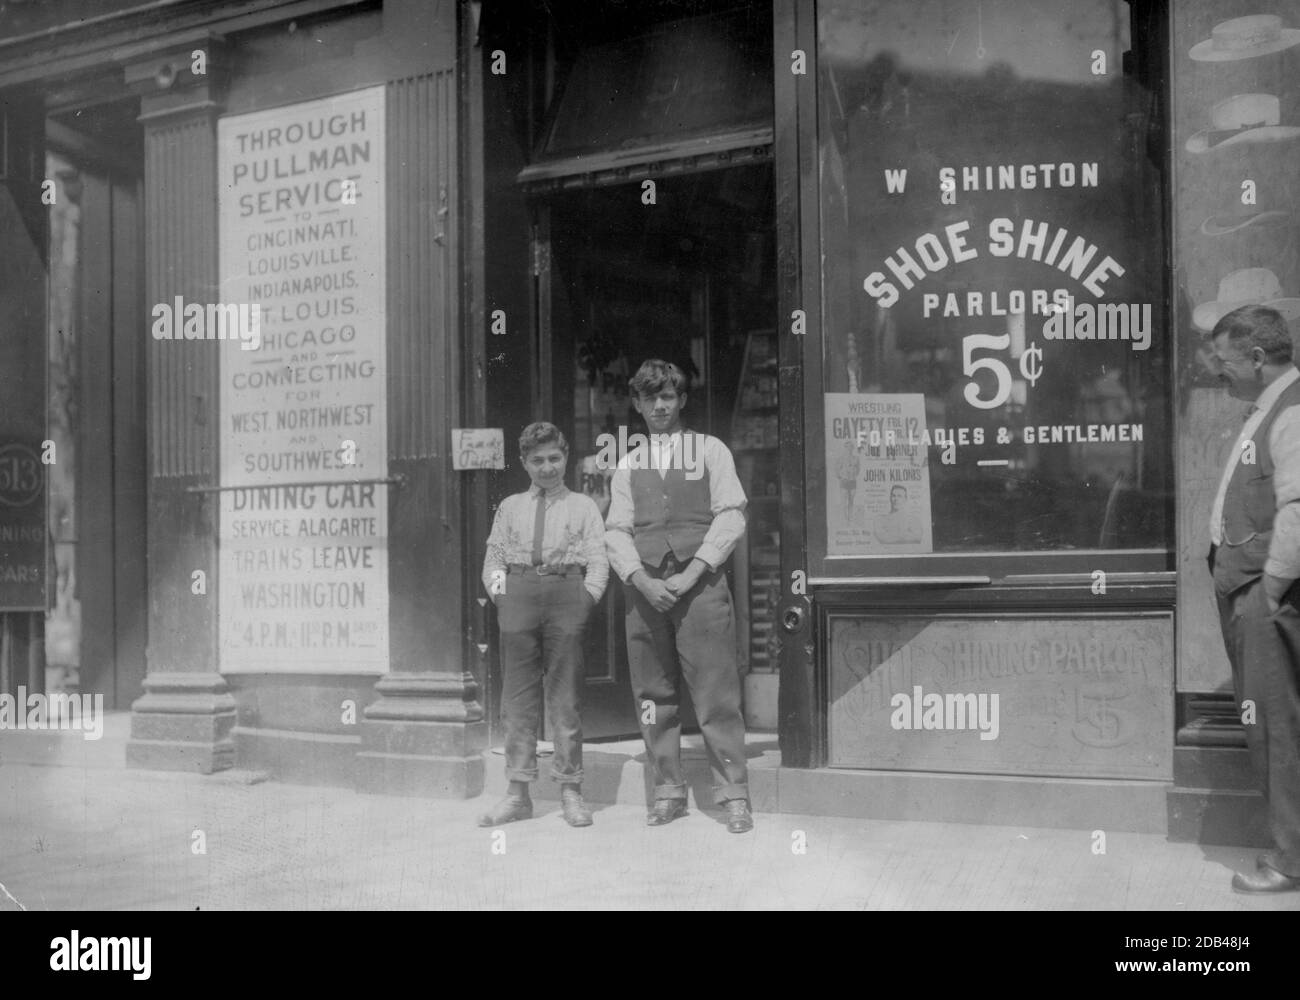 Young boy is Ciriakos Keiradimos, a young Greek shoe-shiner, working in shop at 511 Penn. Ave., N.W., Washington, D.C. Said to be 16 yrs. old, but is absolutely illiterate. Has been in this country only 2 months. Works until 9 P.M. every day and until 11 P.M. . Stock Photo